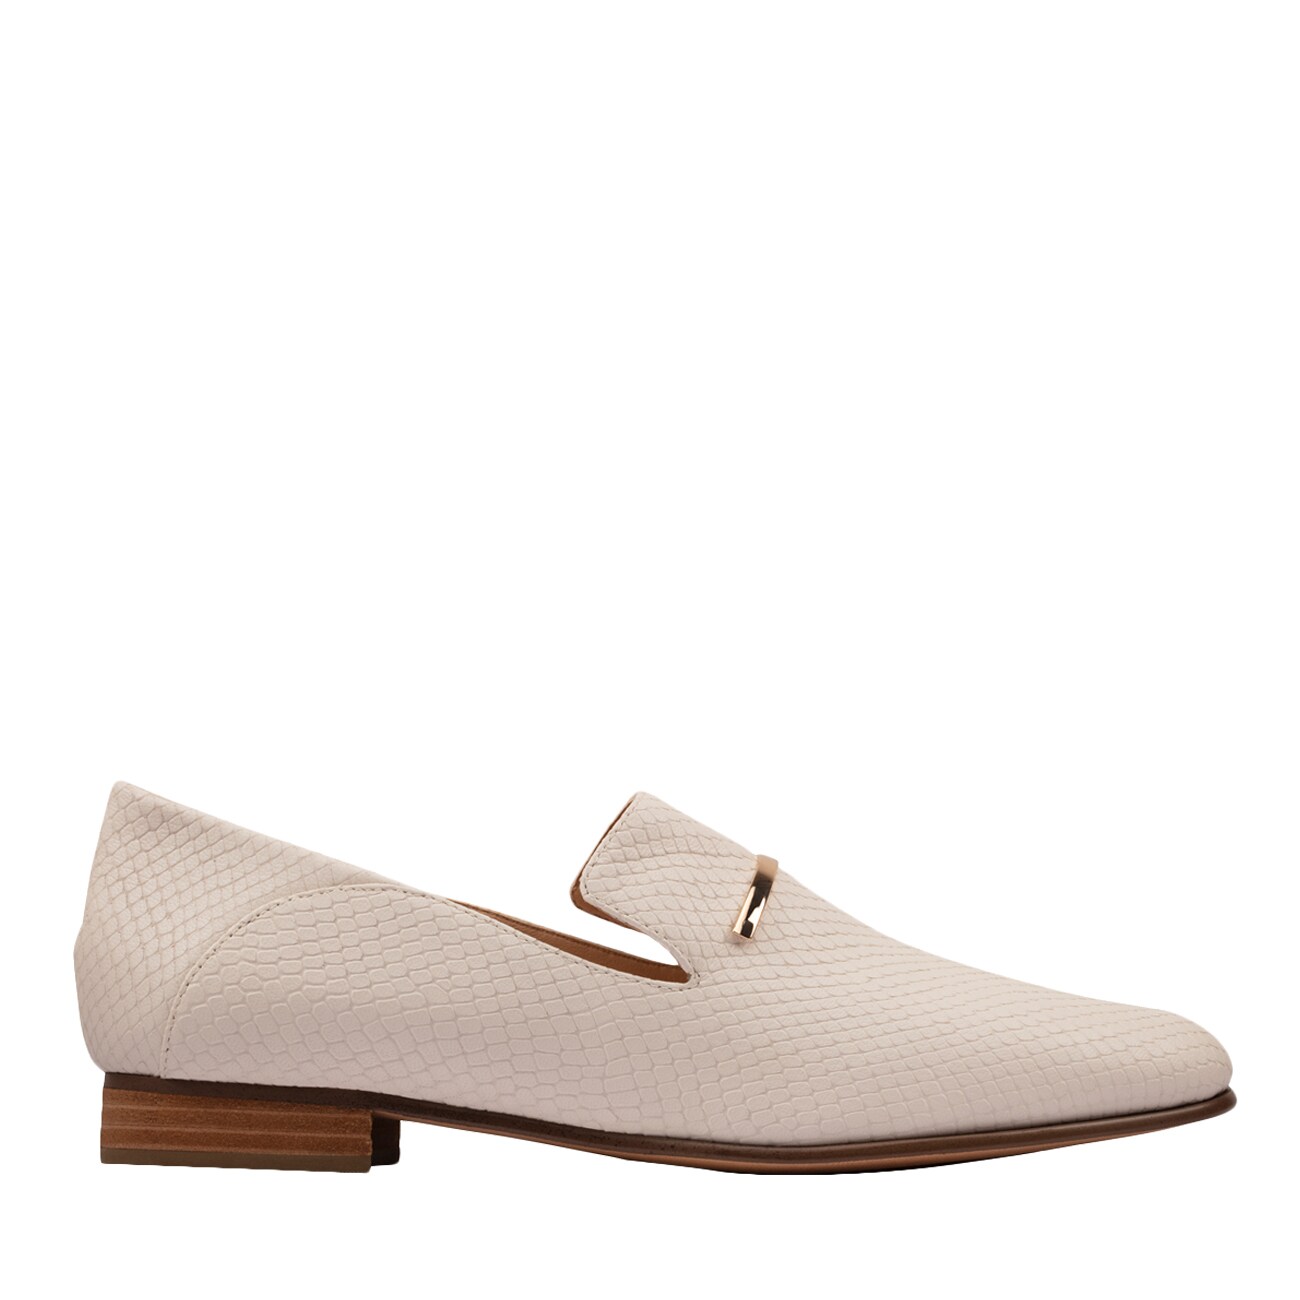 clarks shoes buy online canada